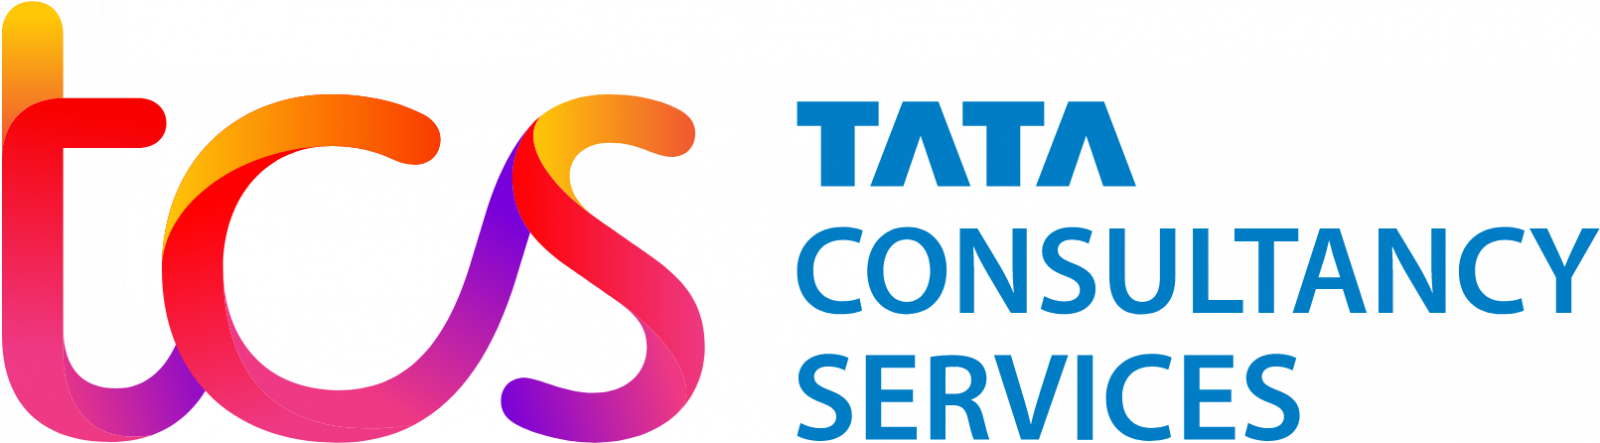 ata Consultancy Services (TCS) IT companies in Pune